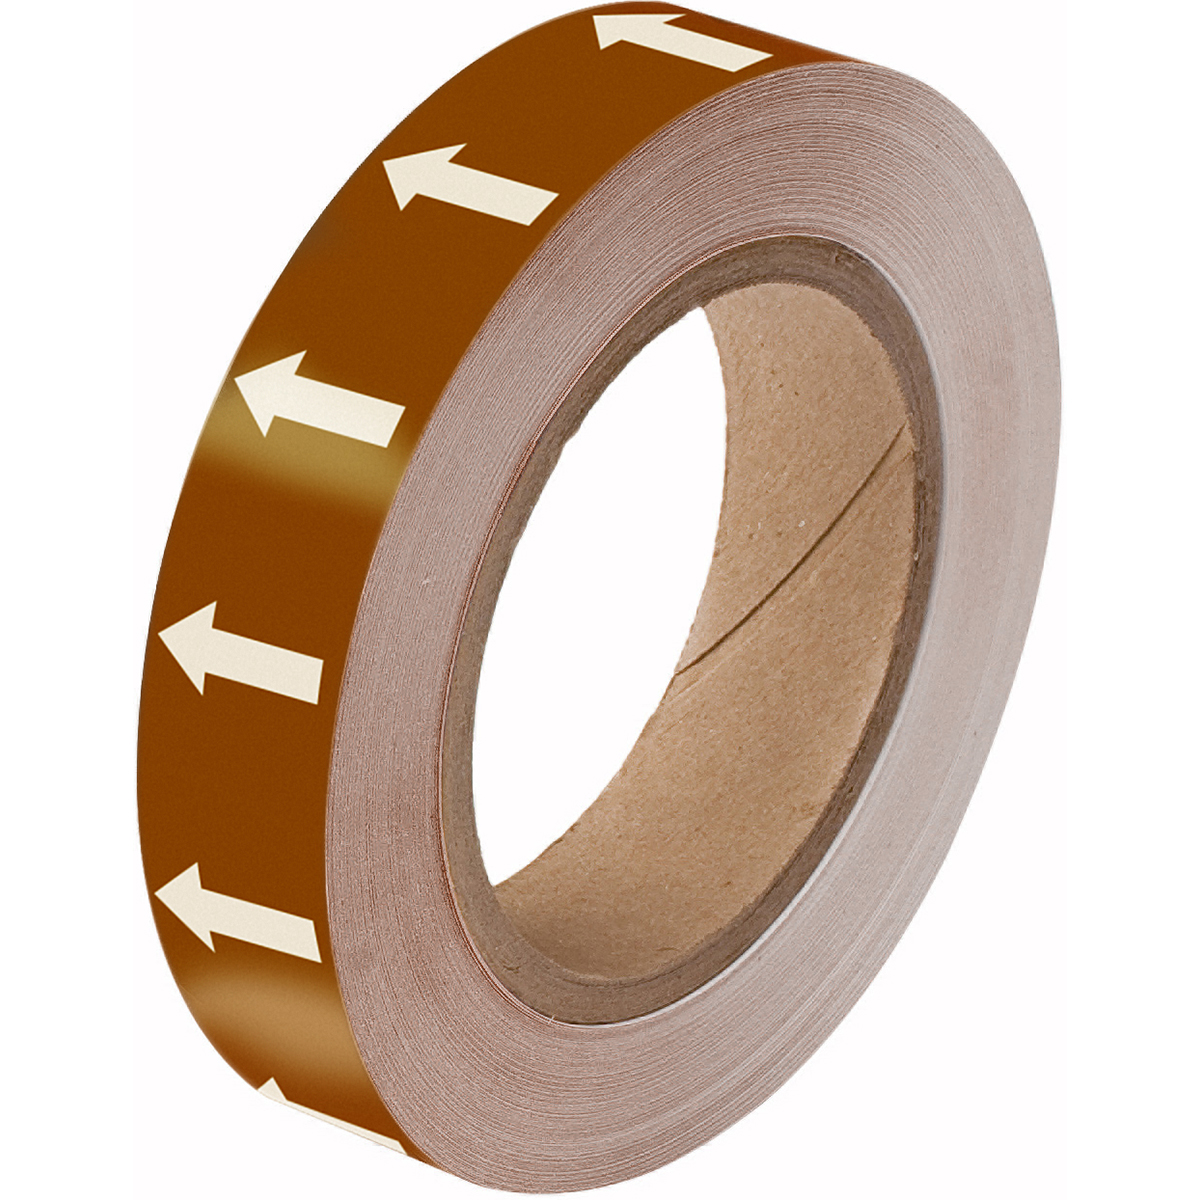 White on Brown Directional Flow Arrow Tape 